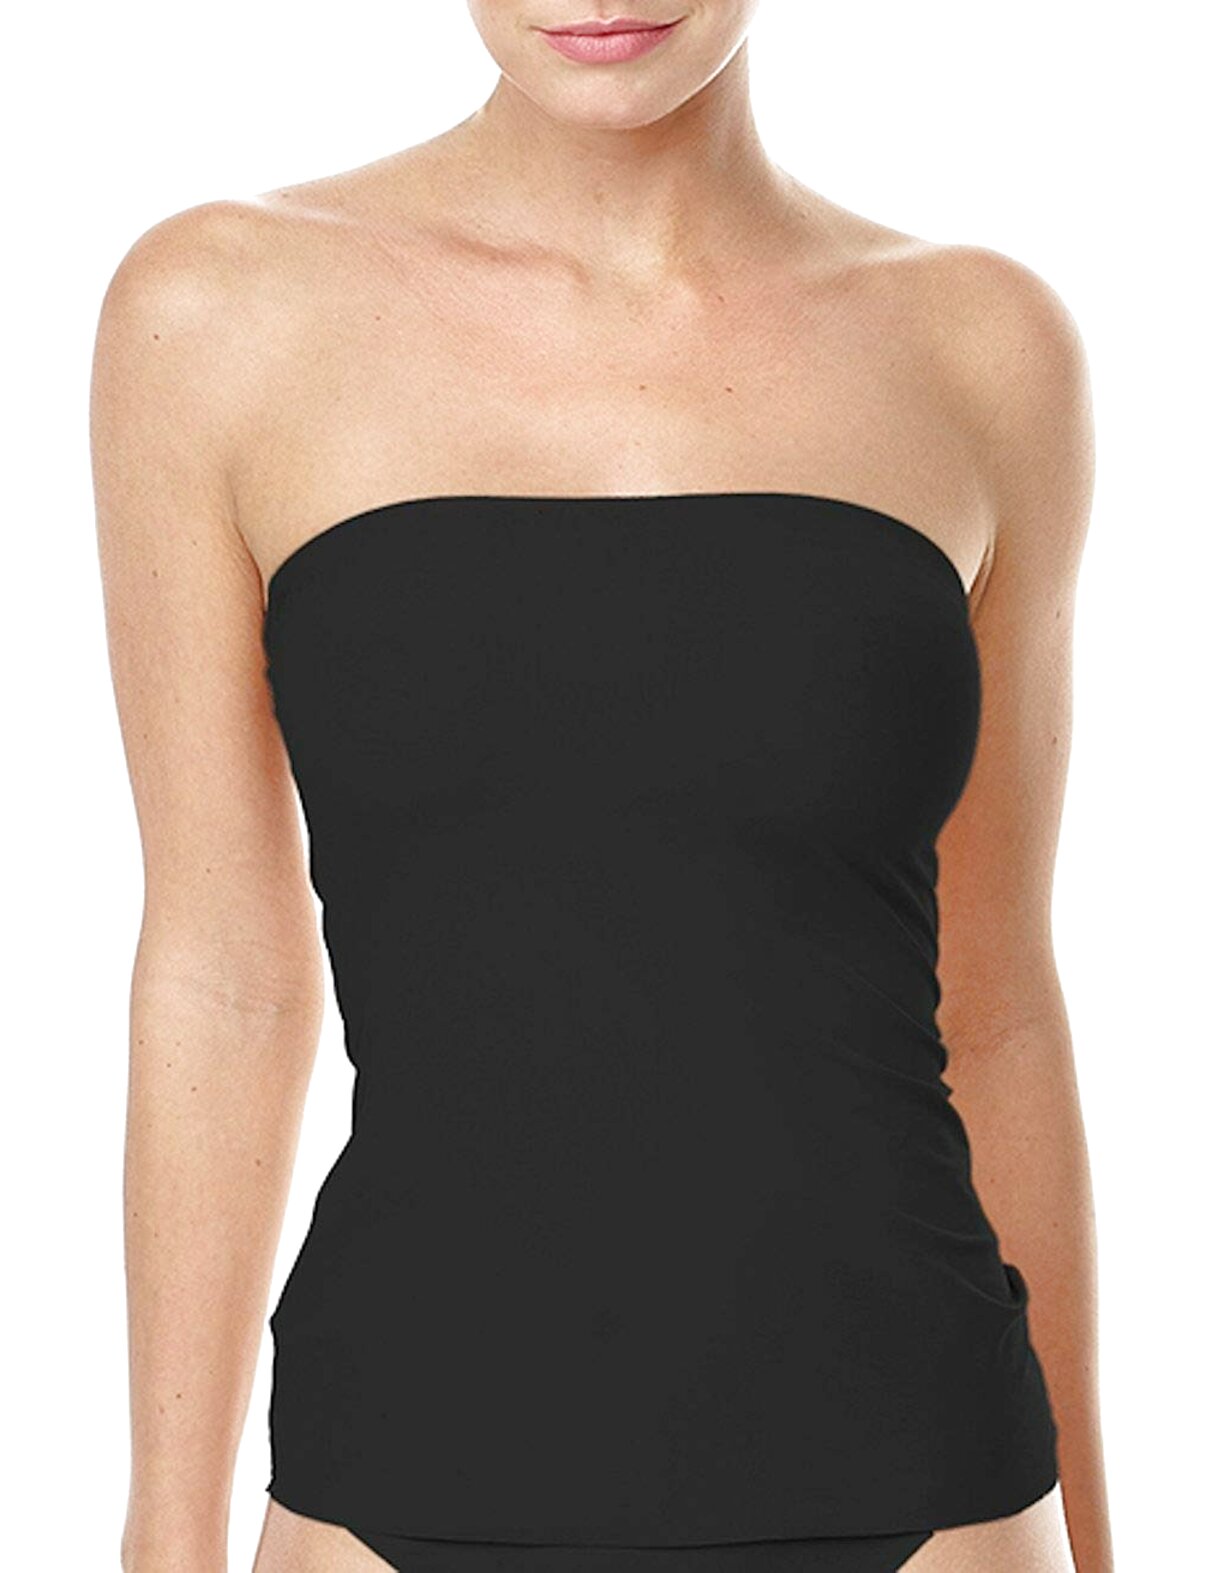 Strapless Camisole for sale in UK | 59 used Strapless Camisoles